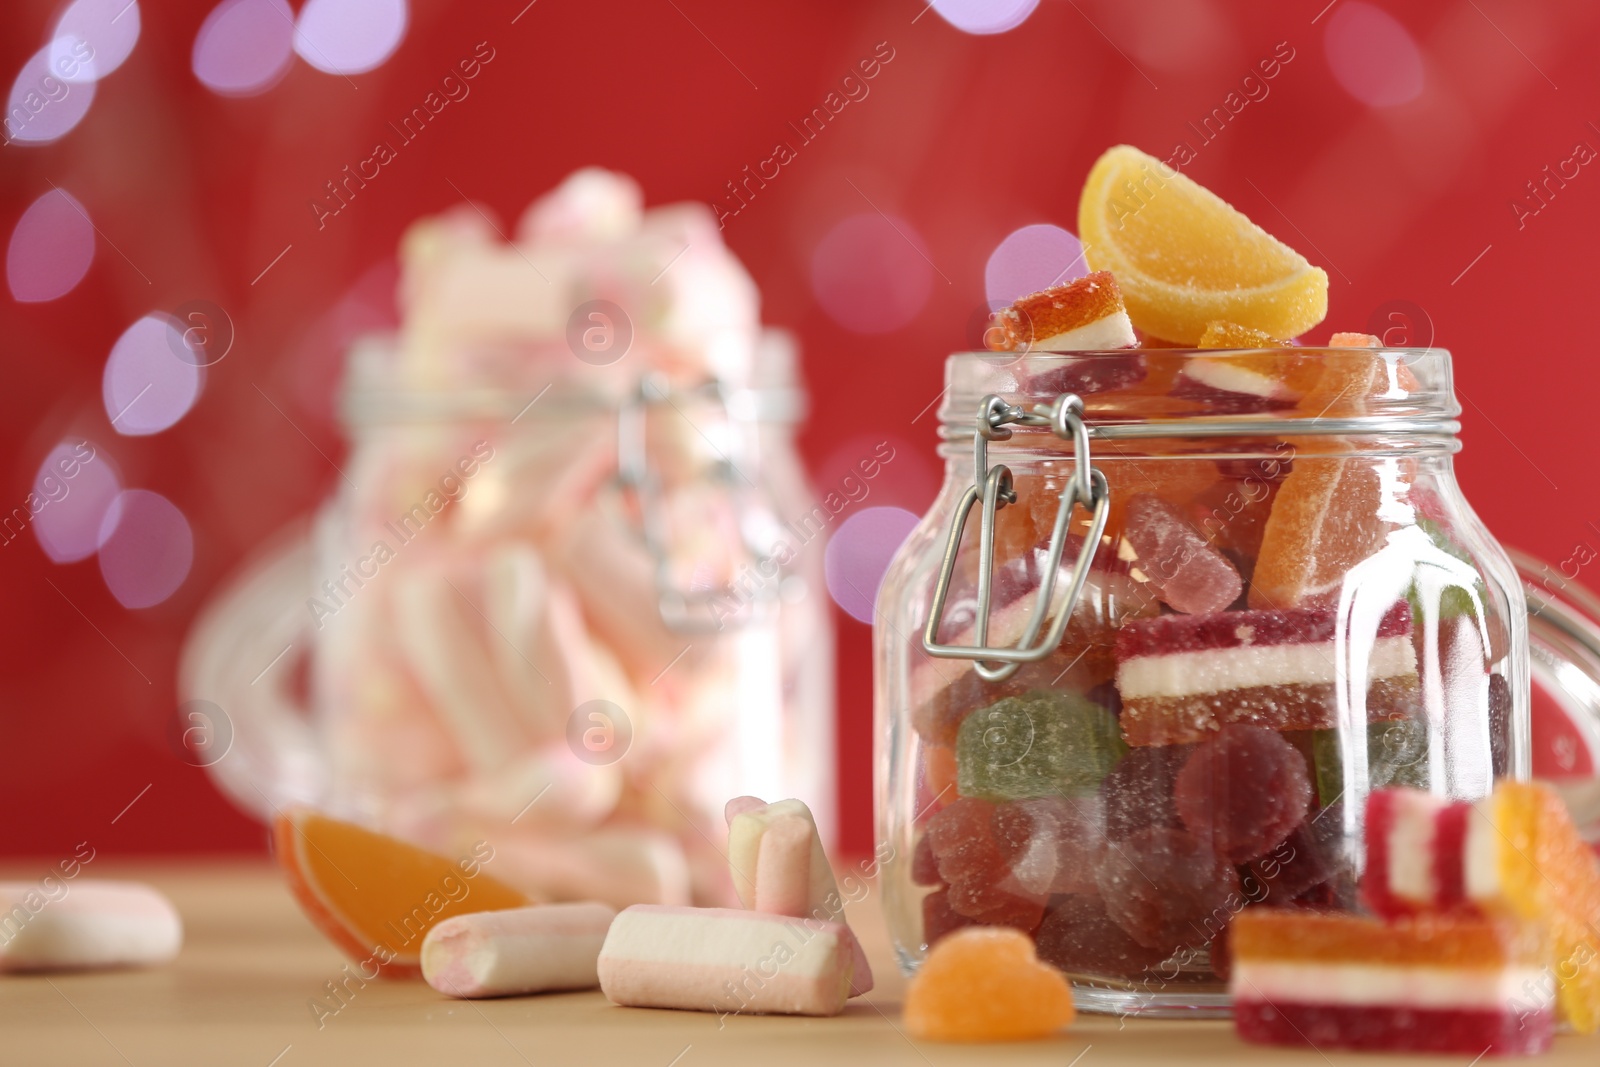 Photo of Delicious jelly candies on table against blurred background, closeup